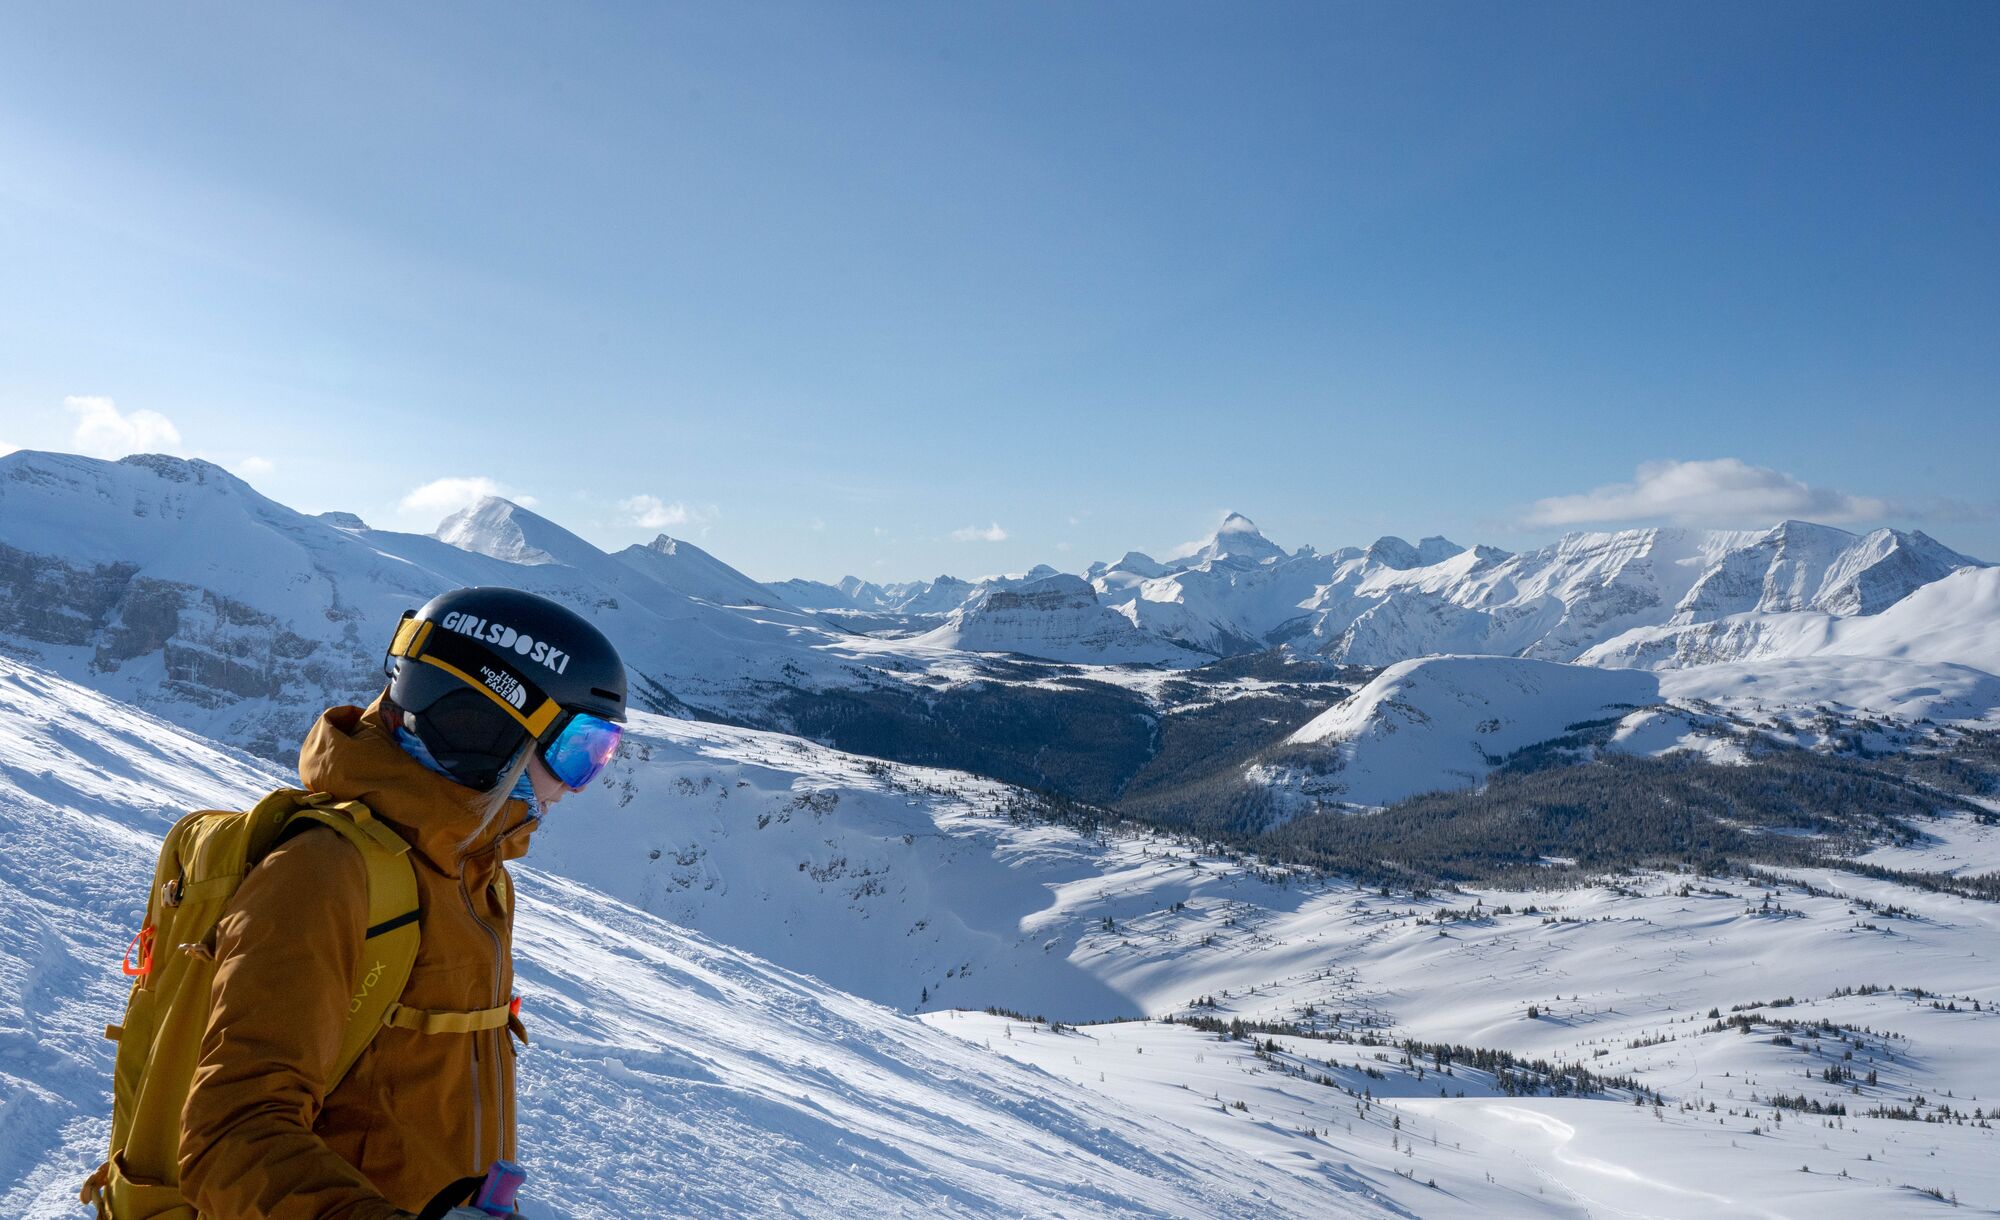 A skier looks out over the South Divide ski run at Banff Sunshine Village in Banff National Park.